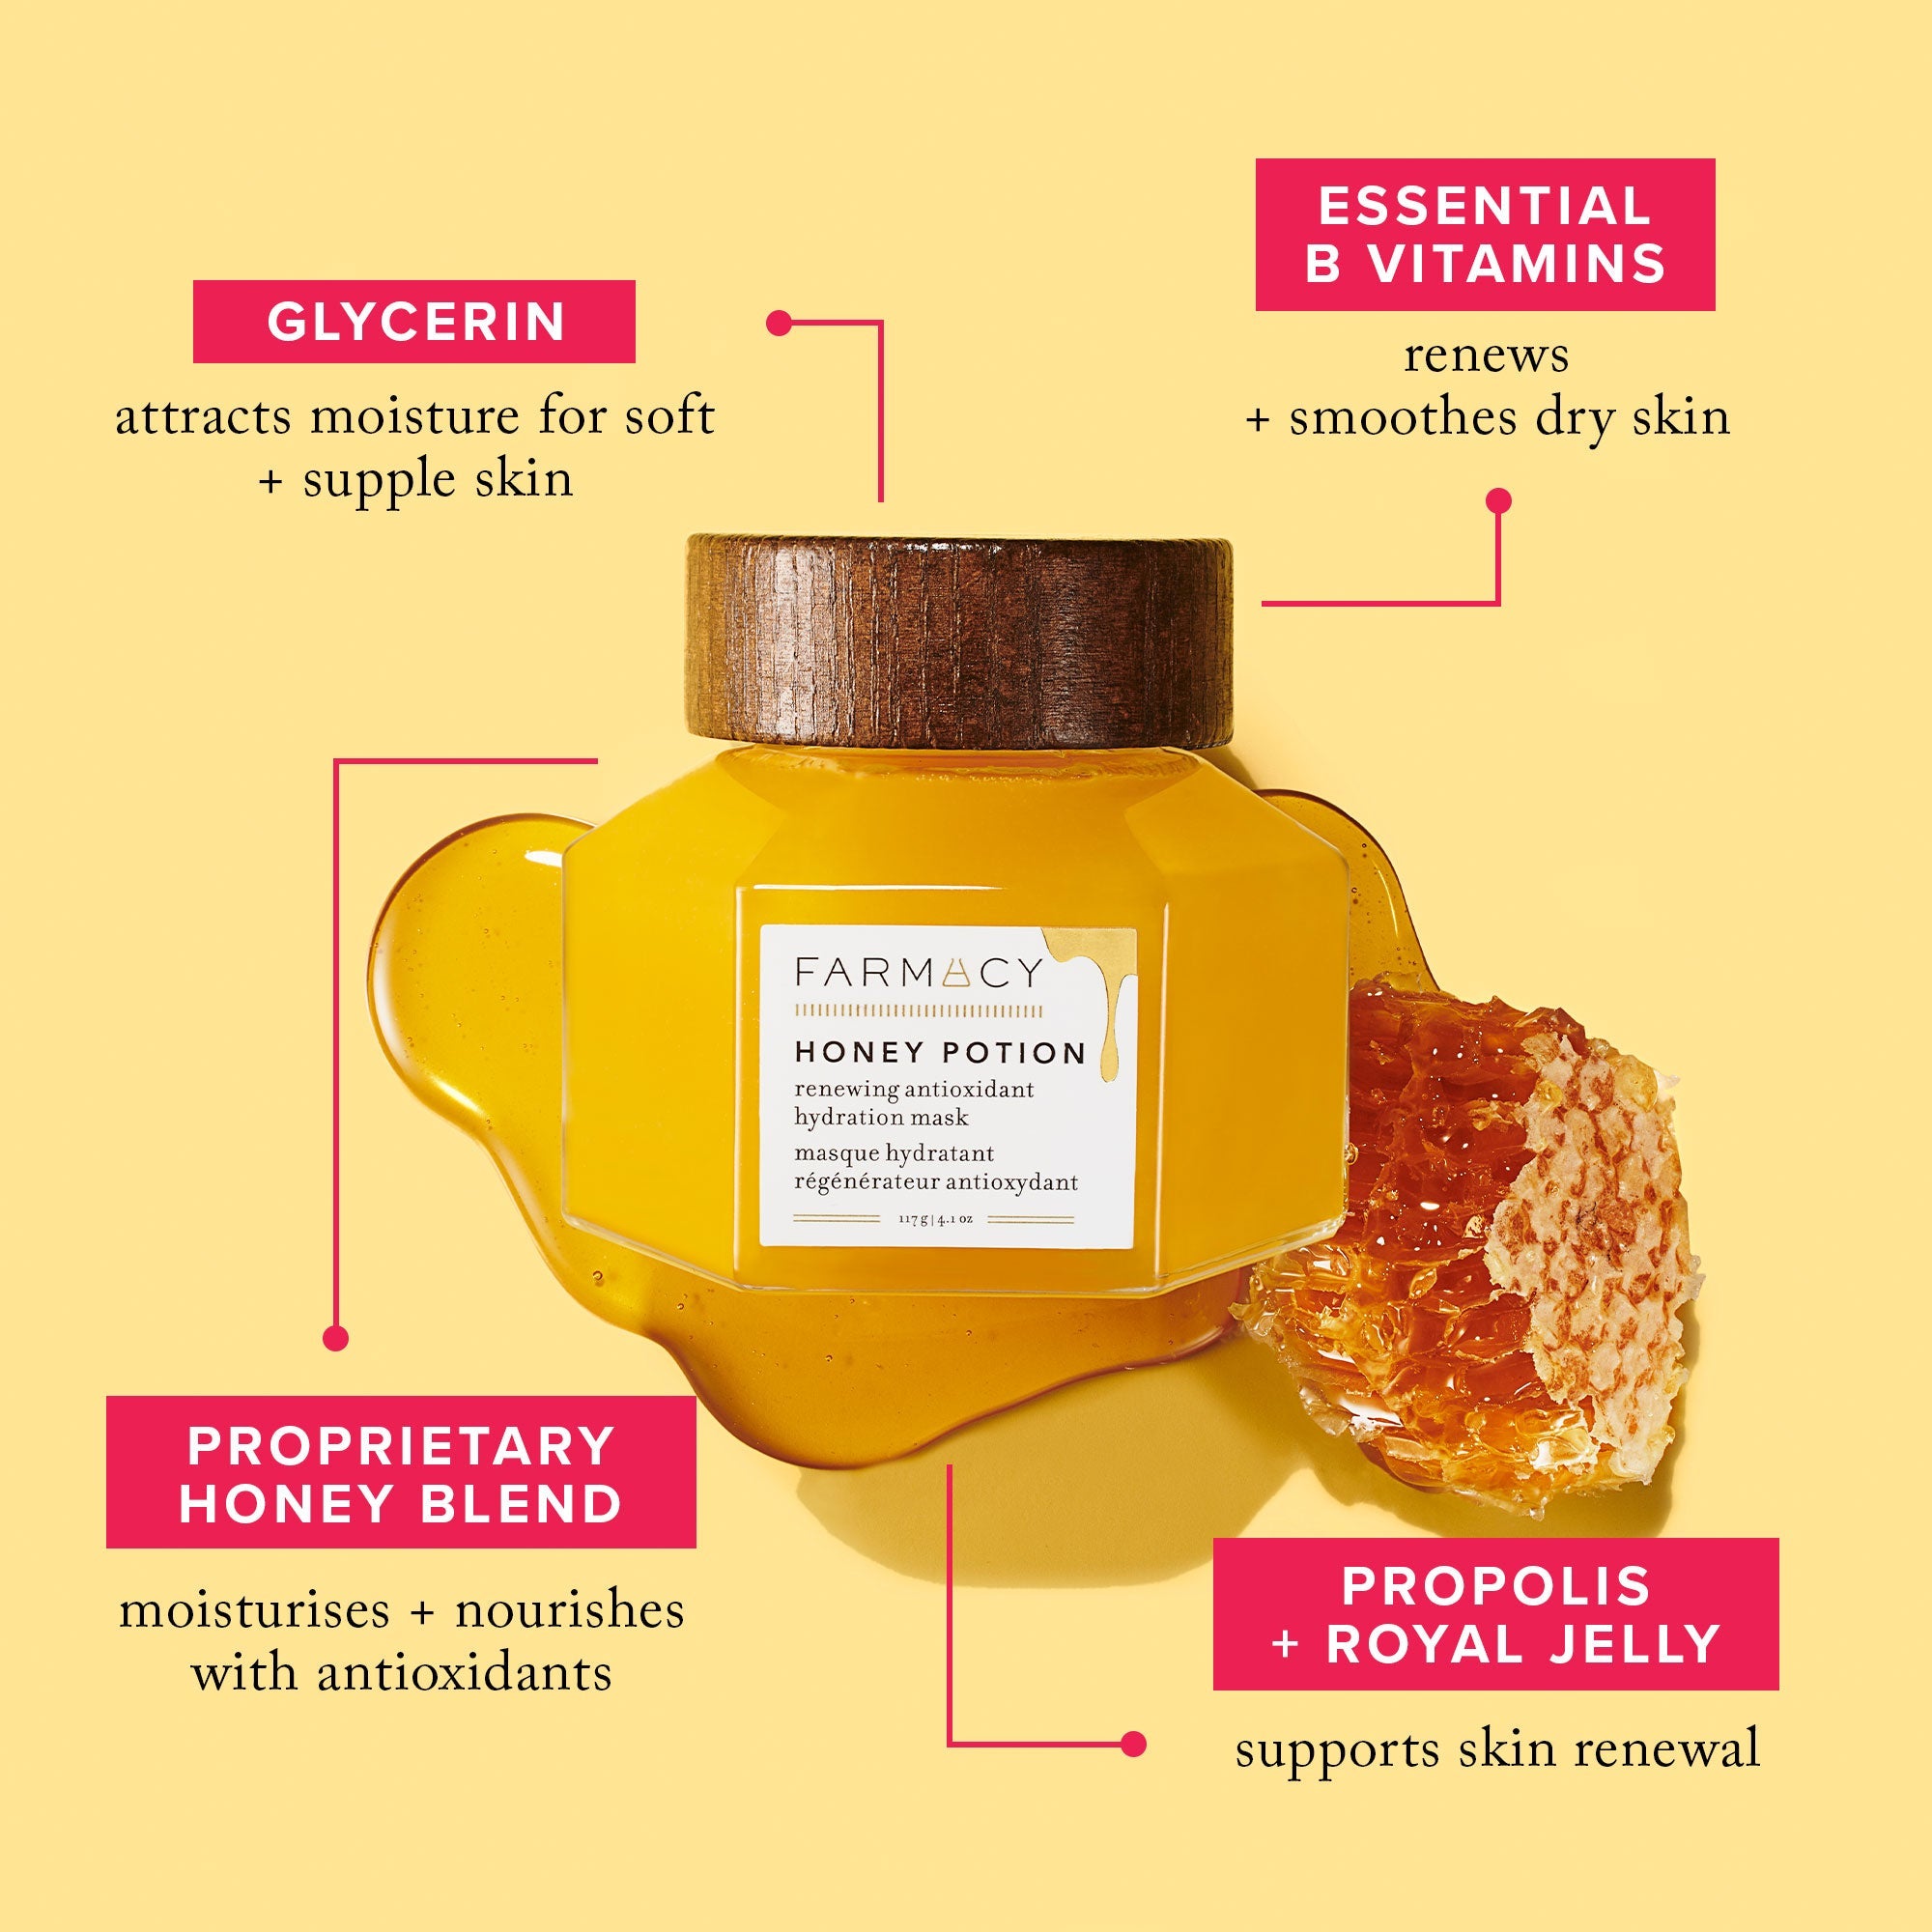  PROPRIETARY HONEY BLEND  moisturises + nourishes with antioxidants  PROPOLIS + ROYAL JELLY  supports skin renewal ESSENTIAL B VITAMINS  renews + smoothes dry skin GLYCERIN  attracts moisture for soft, supple skin